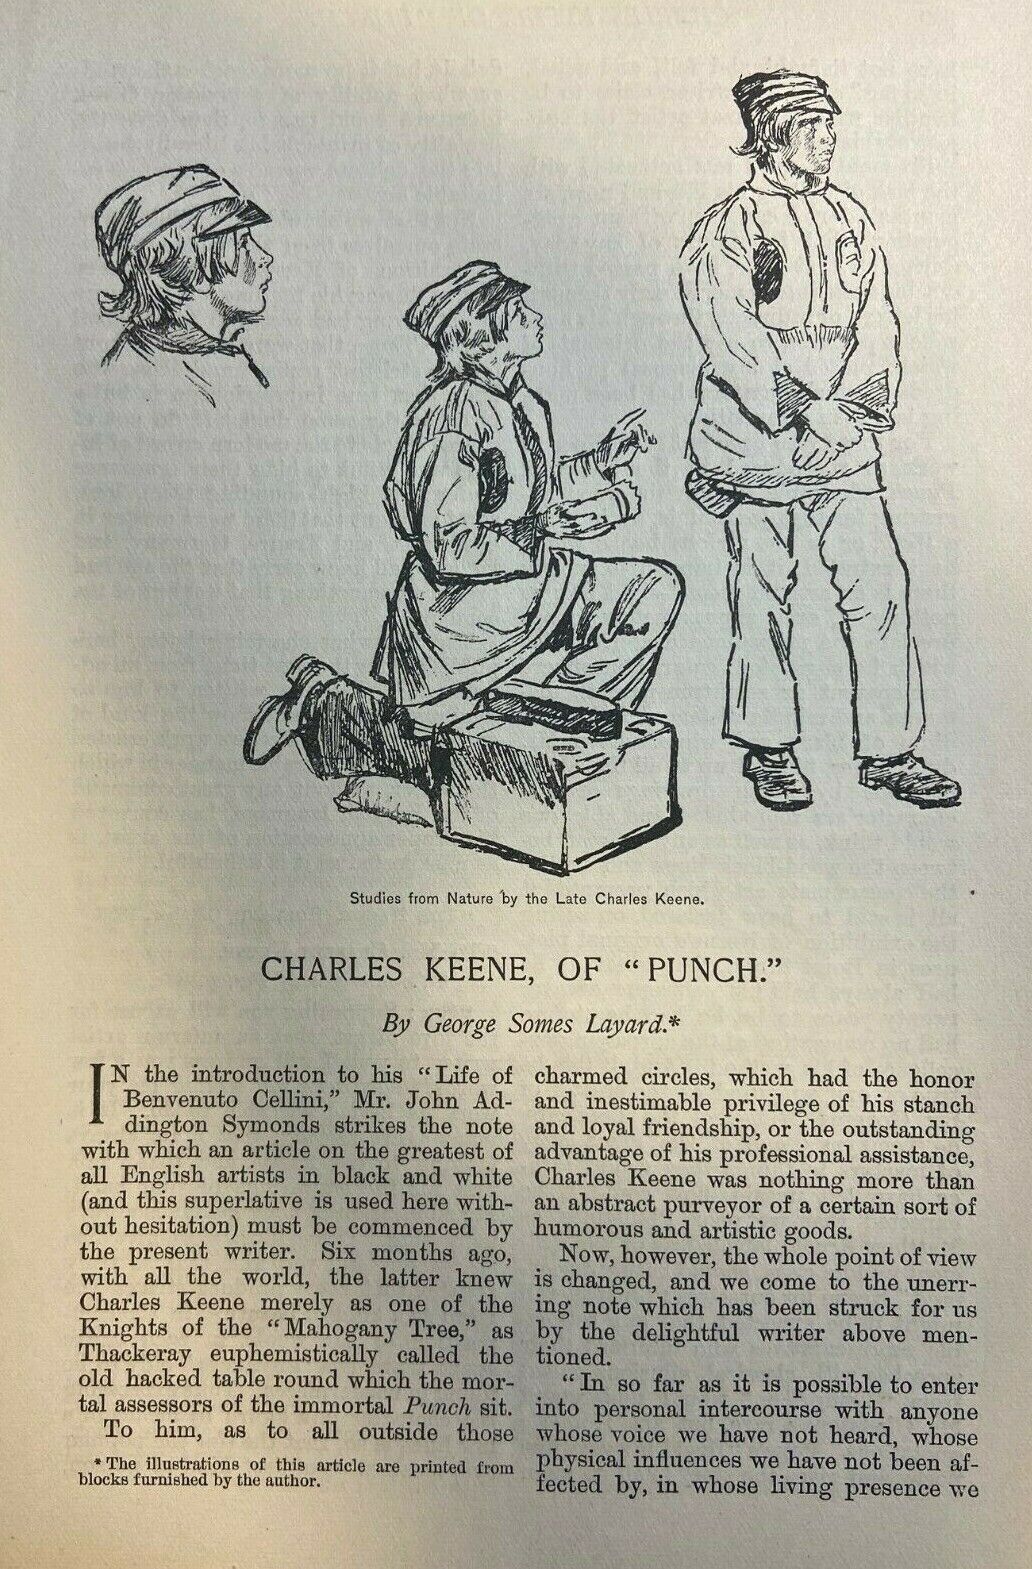 1892 Artist Charles Keene of Punch illustrated